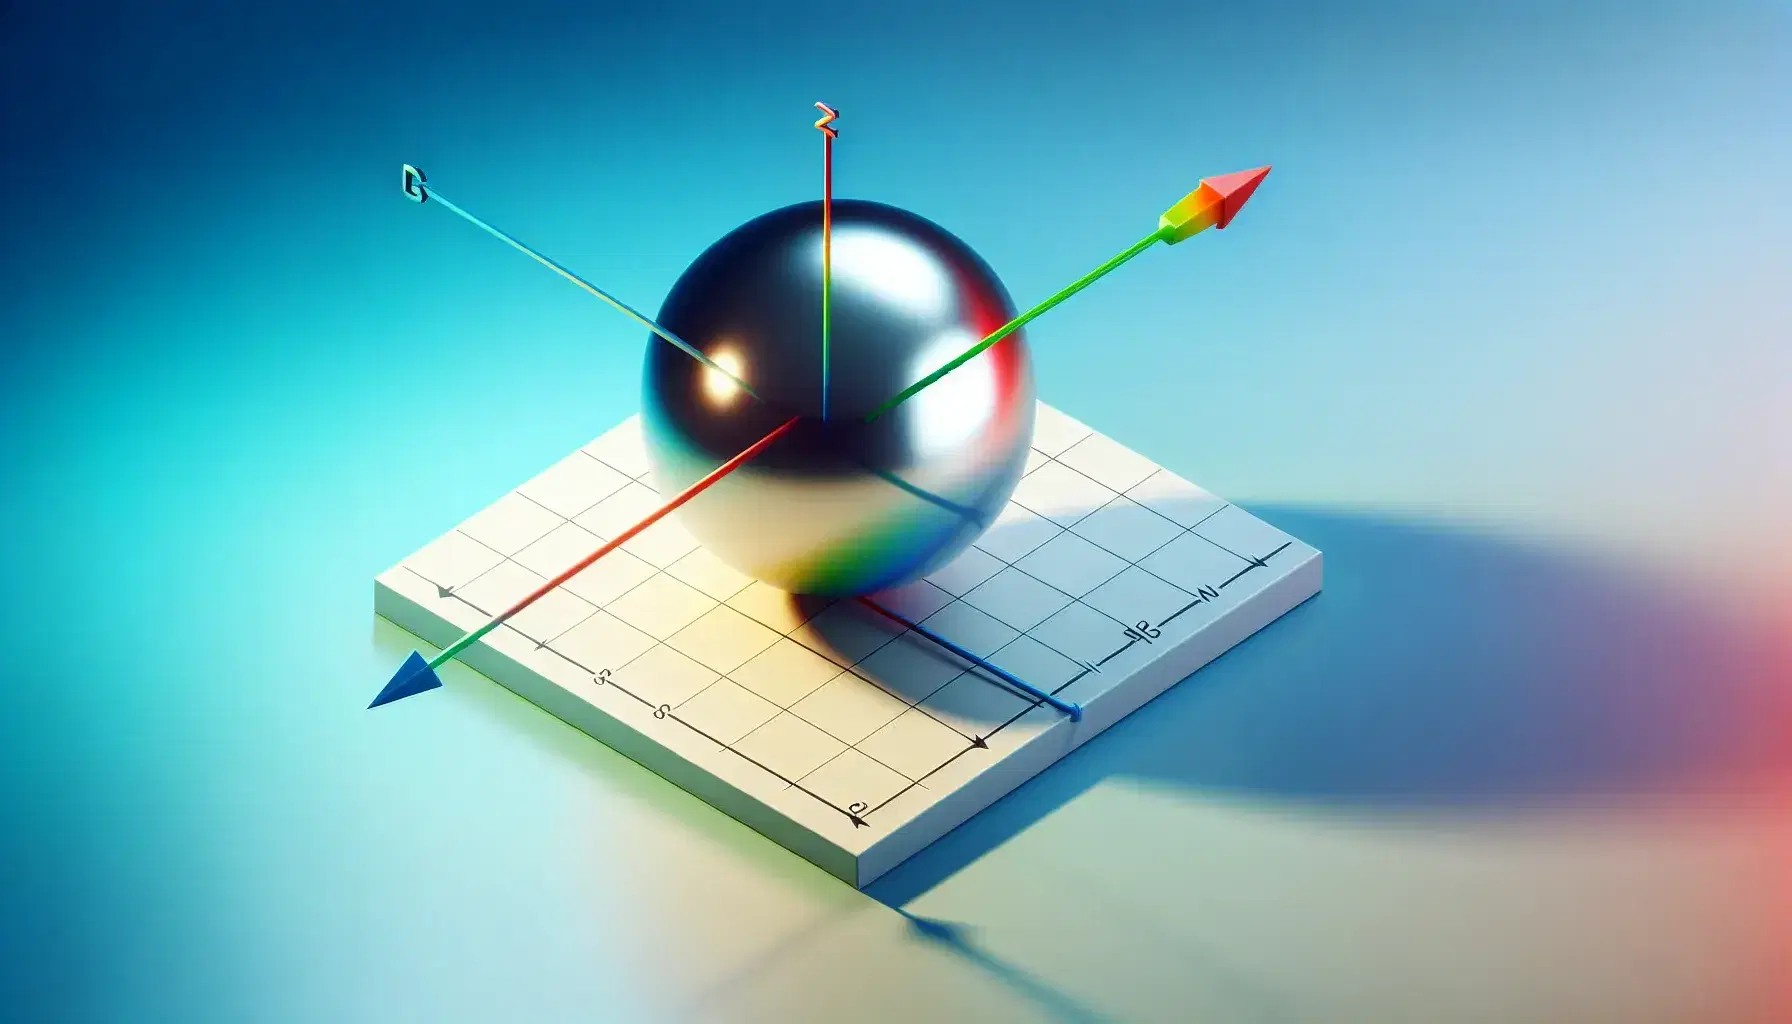 3D coordinate system with red x-axis, green y-axis, blue z-axis, reflective metallic sphere at origin with yellow vector pointing up, and wooden blocks along x-axis.